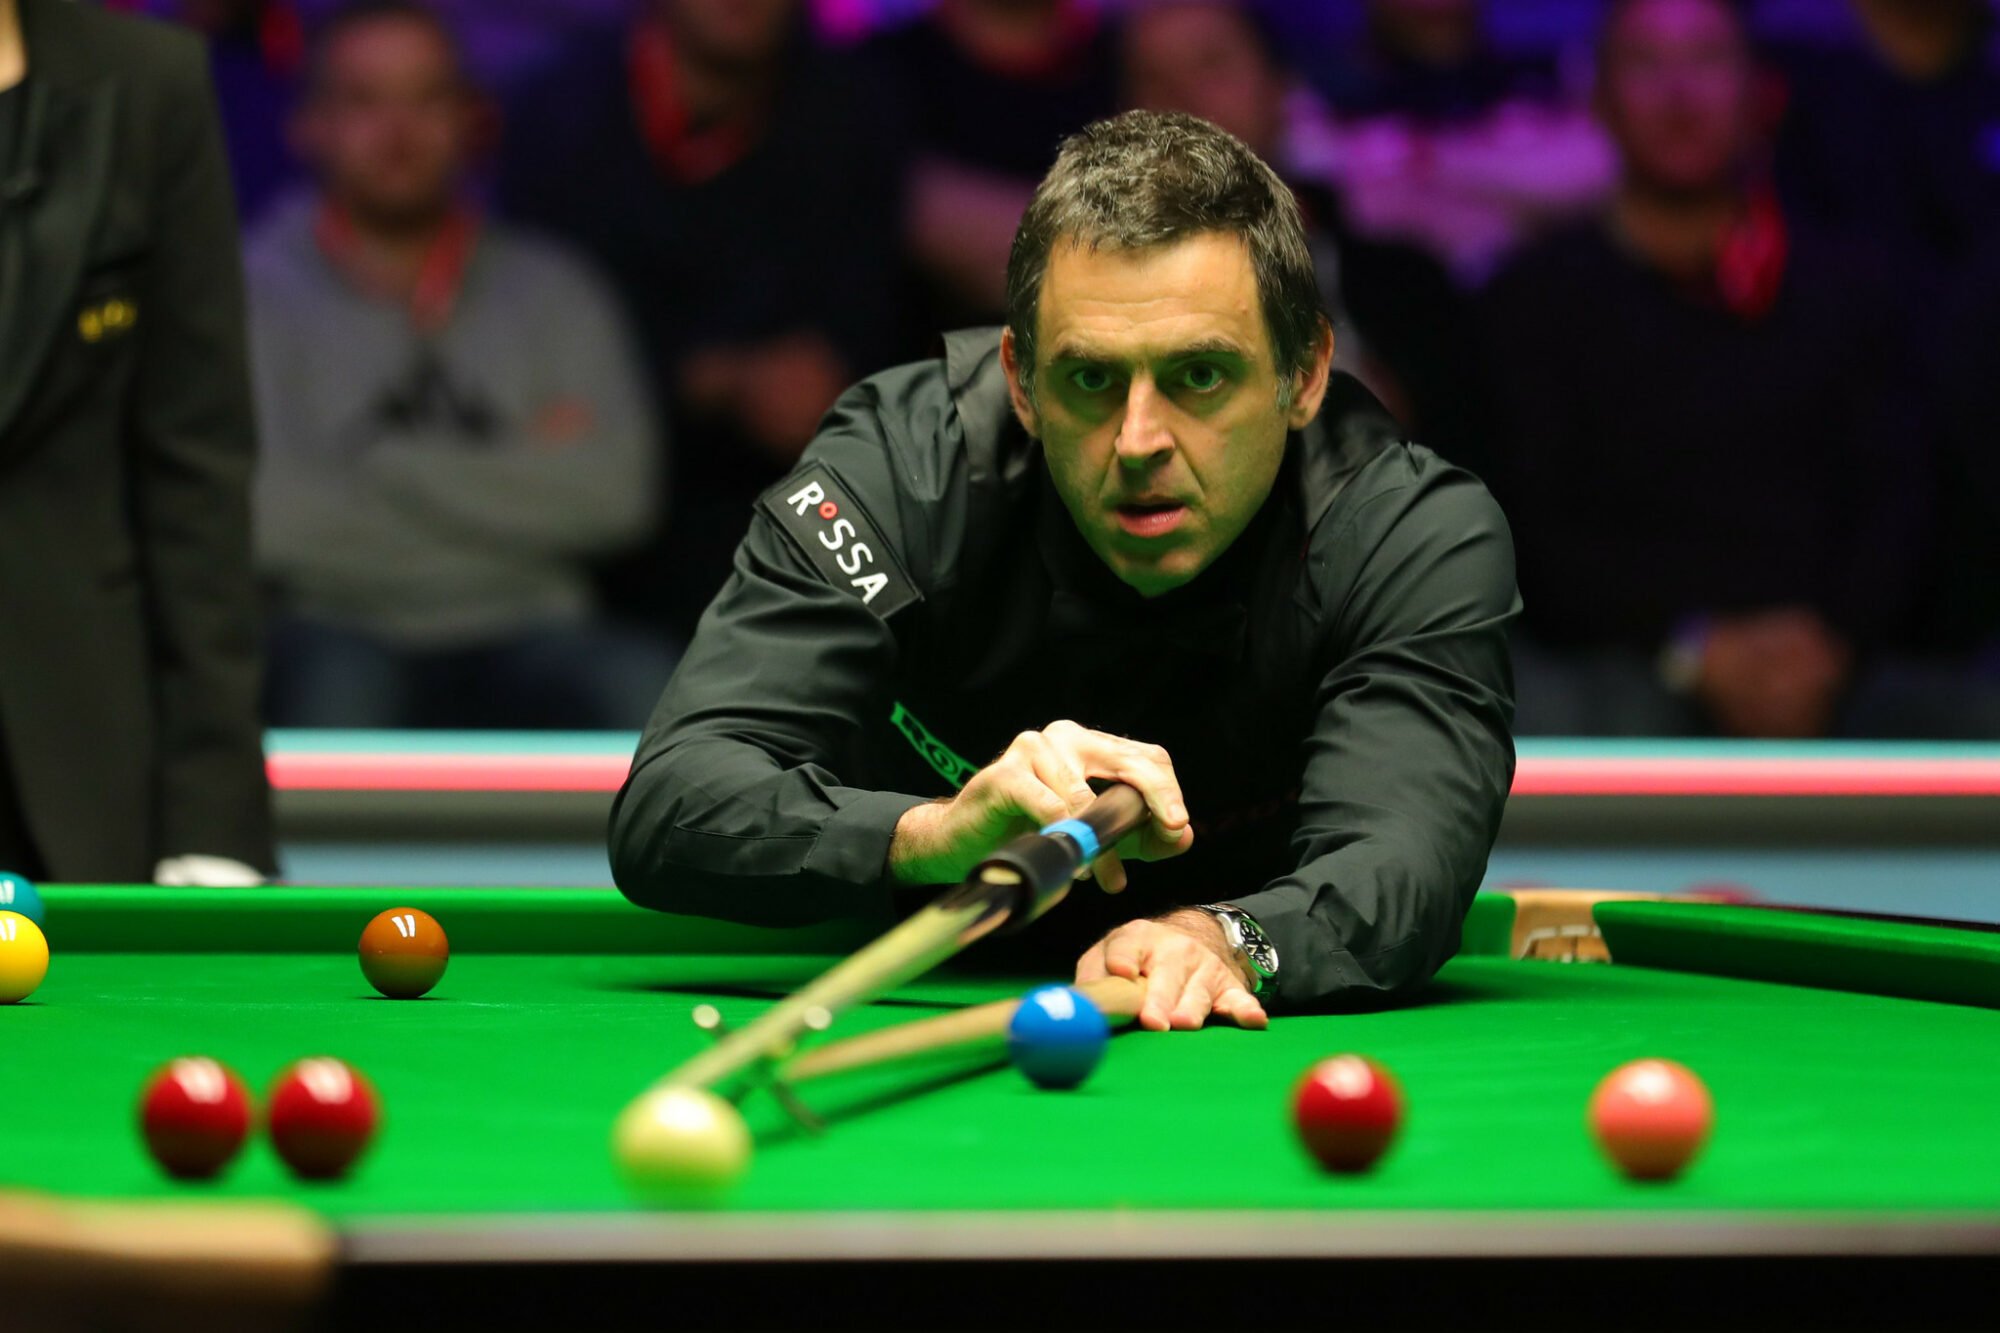 Image name Ronnie OSullivan the 8 image from the post <strong>Snooker: Final Weekend In York Sold Out</strong> in Yorkshire.com.